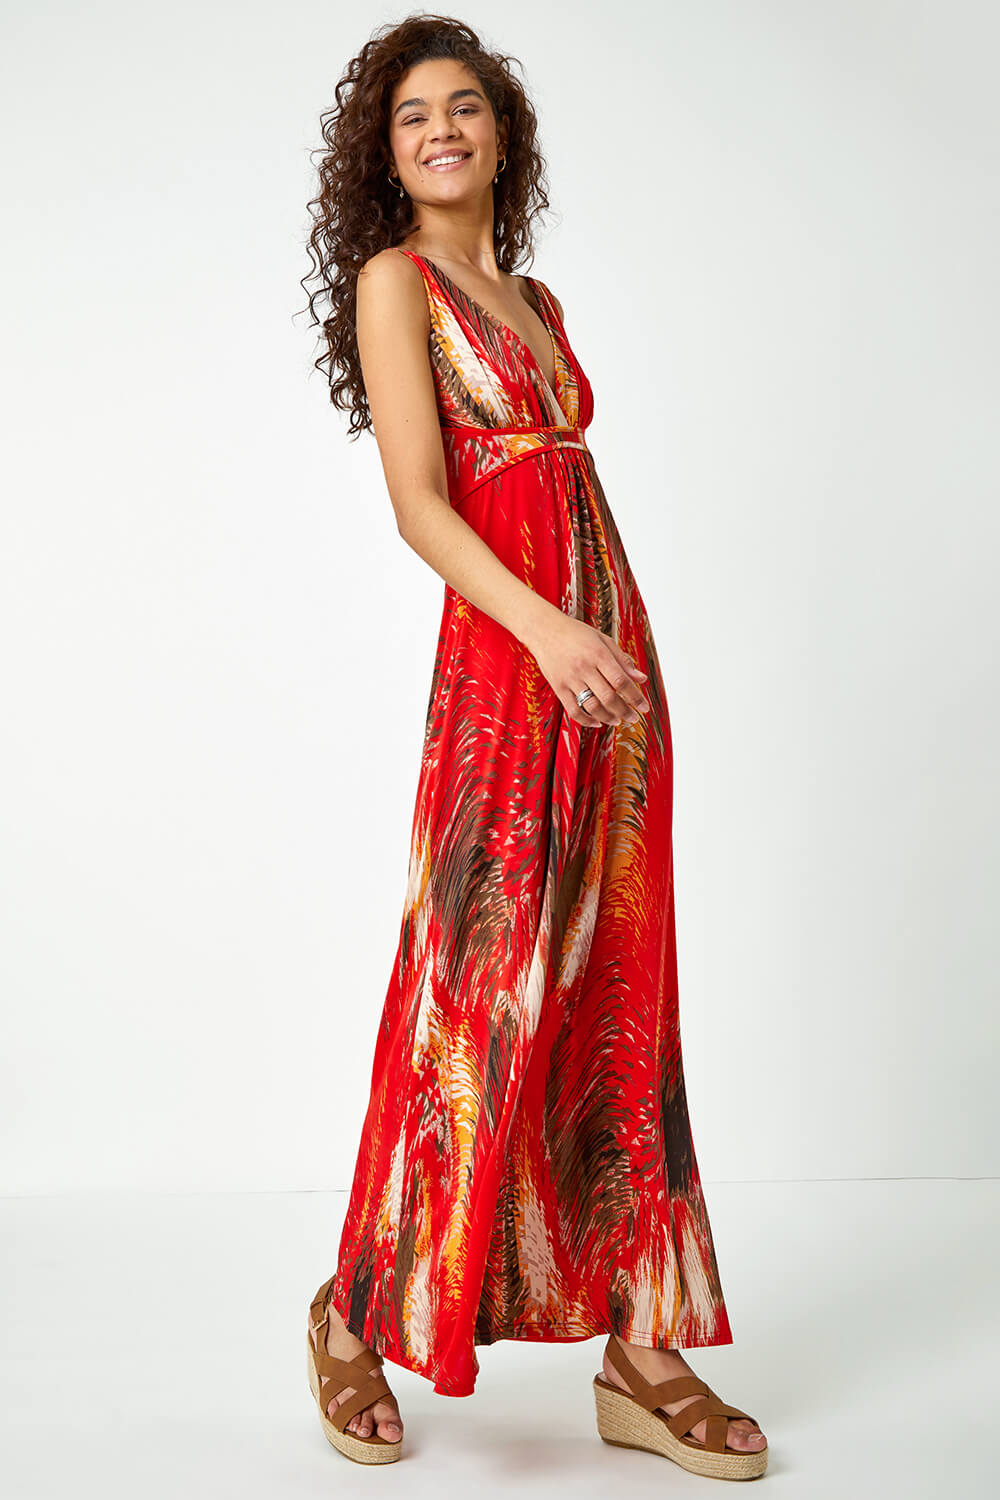 ORANGE Abstract Print Stretch Jersey Maxi Dress, Image 2 of 5